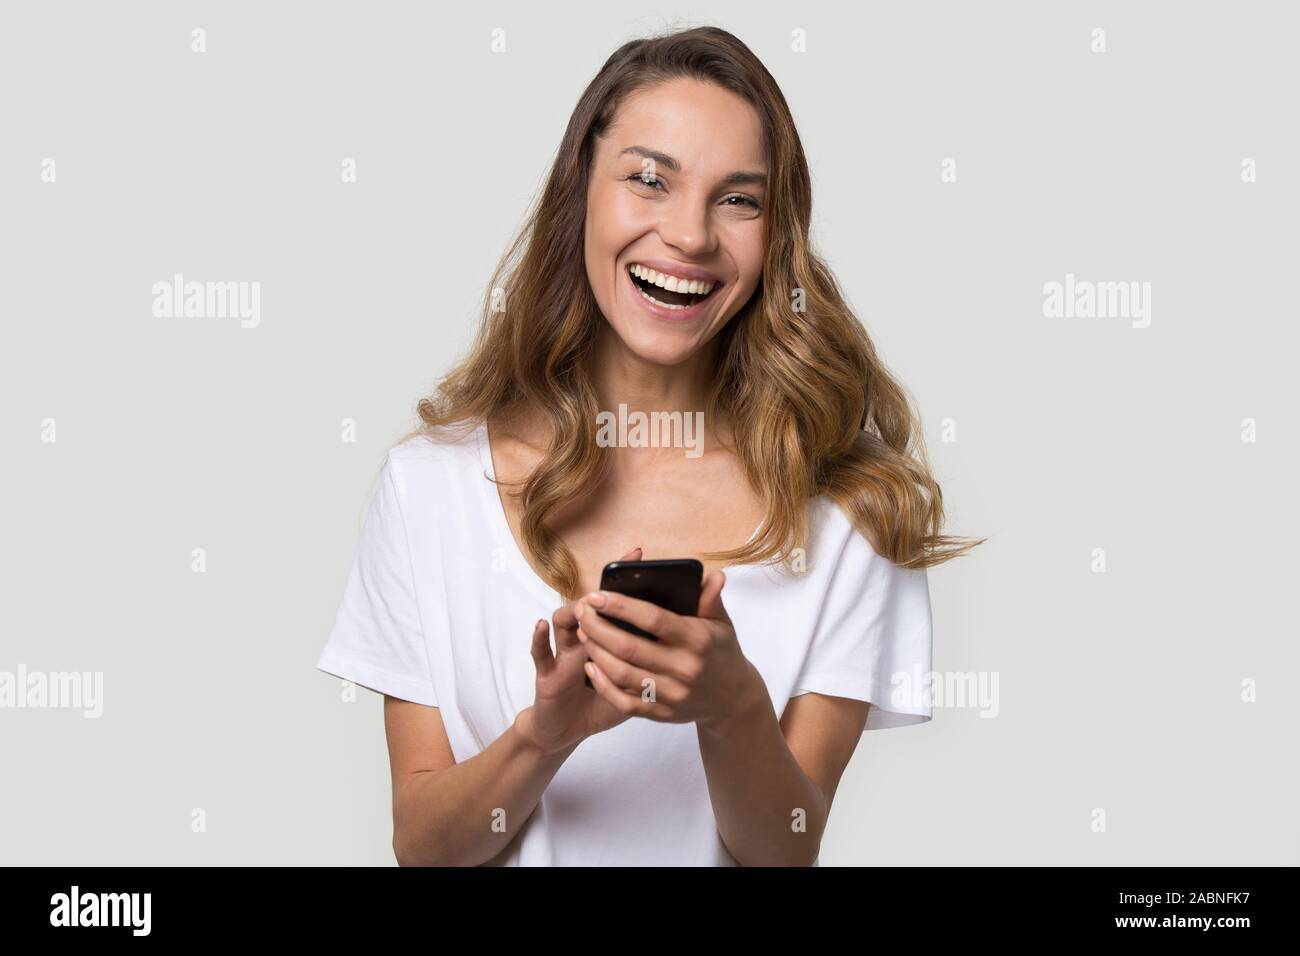 Happy laughing young woman using cellphone apps, having fun Stock Photo